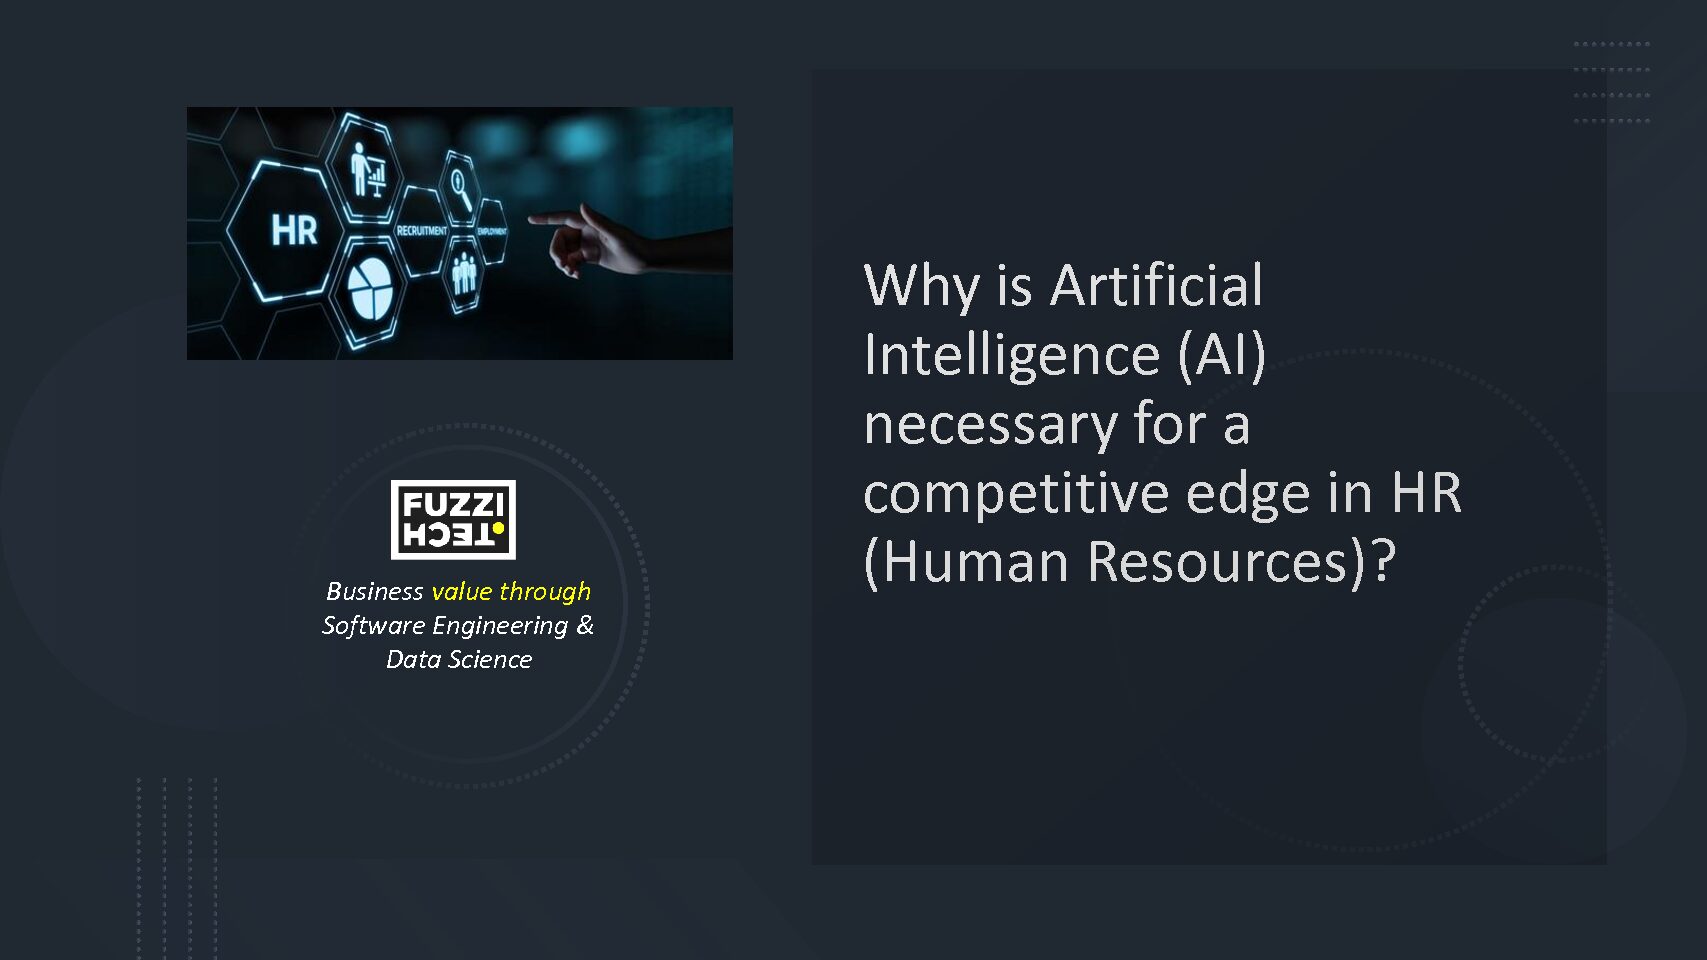 Why is Artificial Intelligence (AI) necessary for a competitive edge in HR (Human Resources) for a competitive edge?